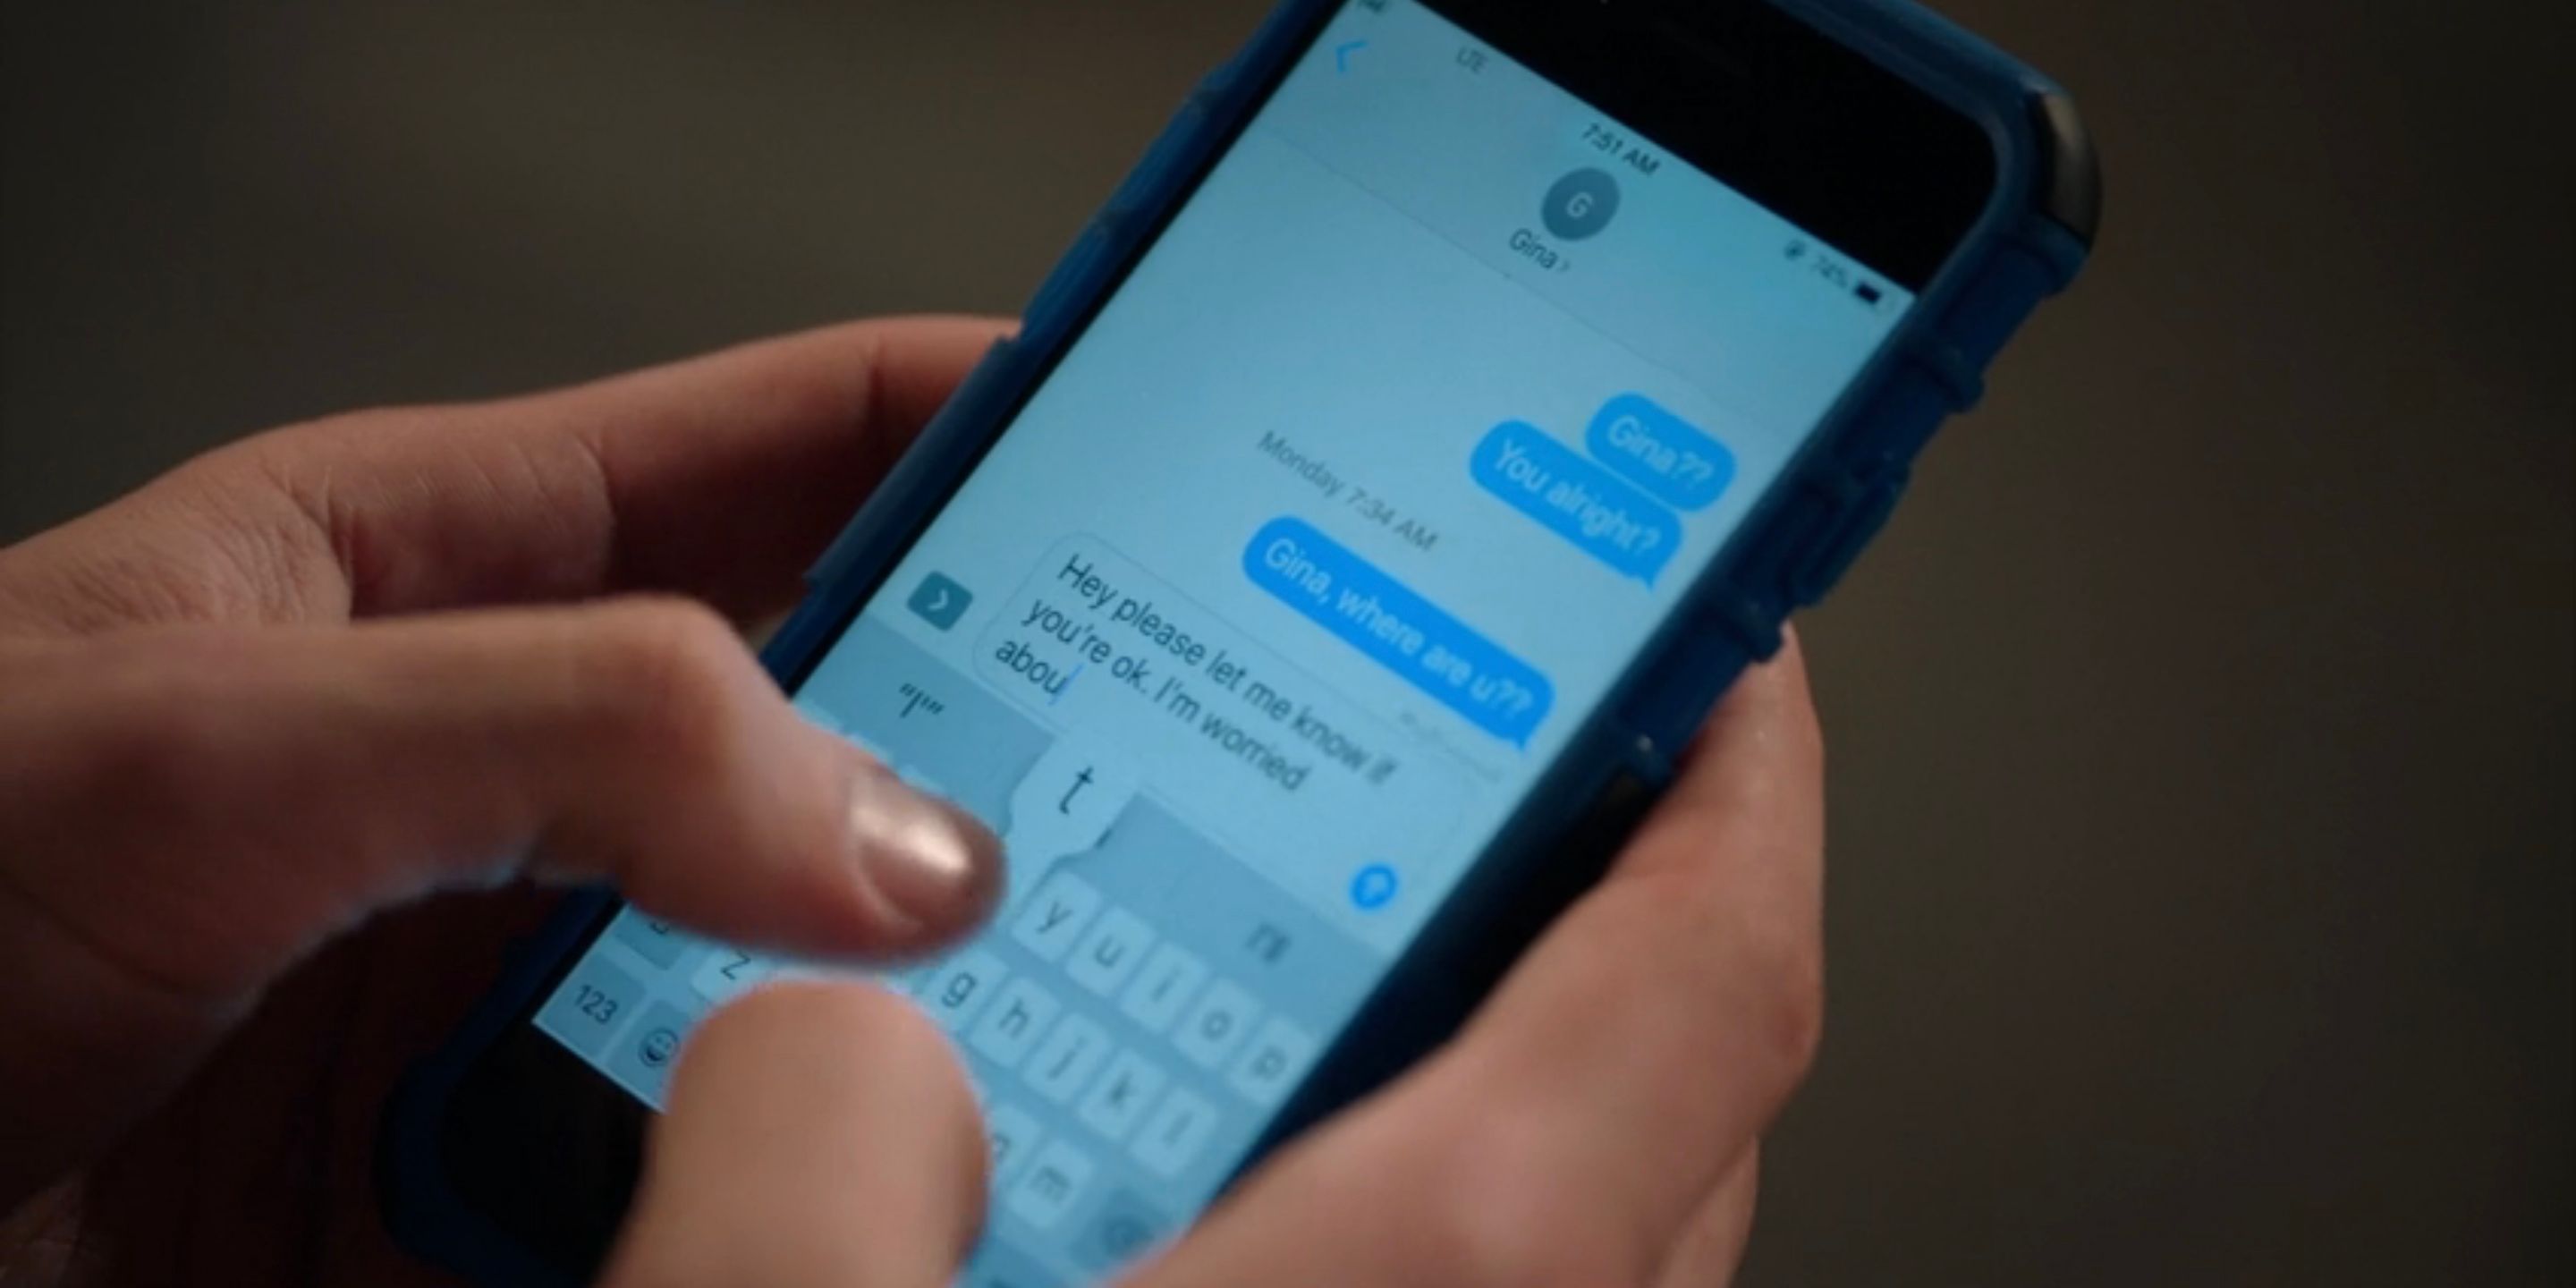 Ricky texts Gina in High School Musical the Series